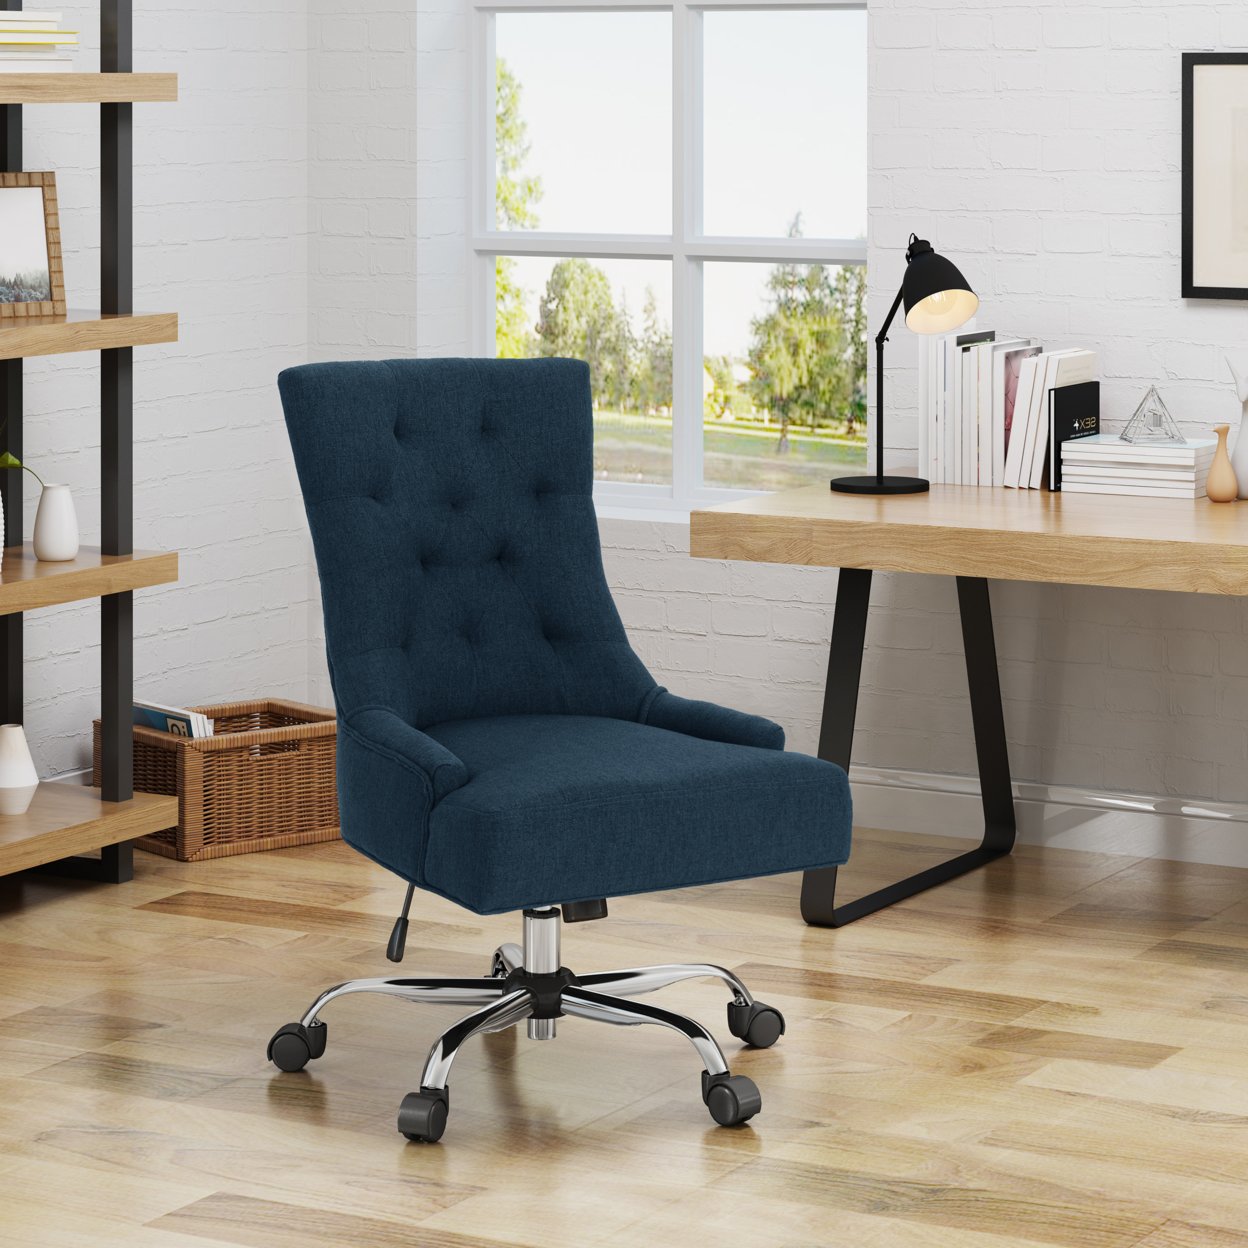 Bagnold Home Office Fabric Desk Chair - Dark Gray